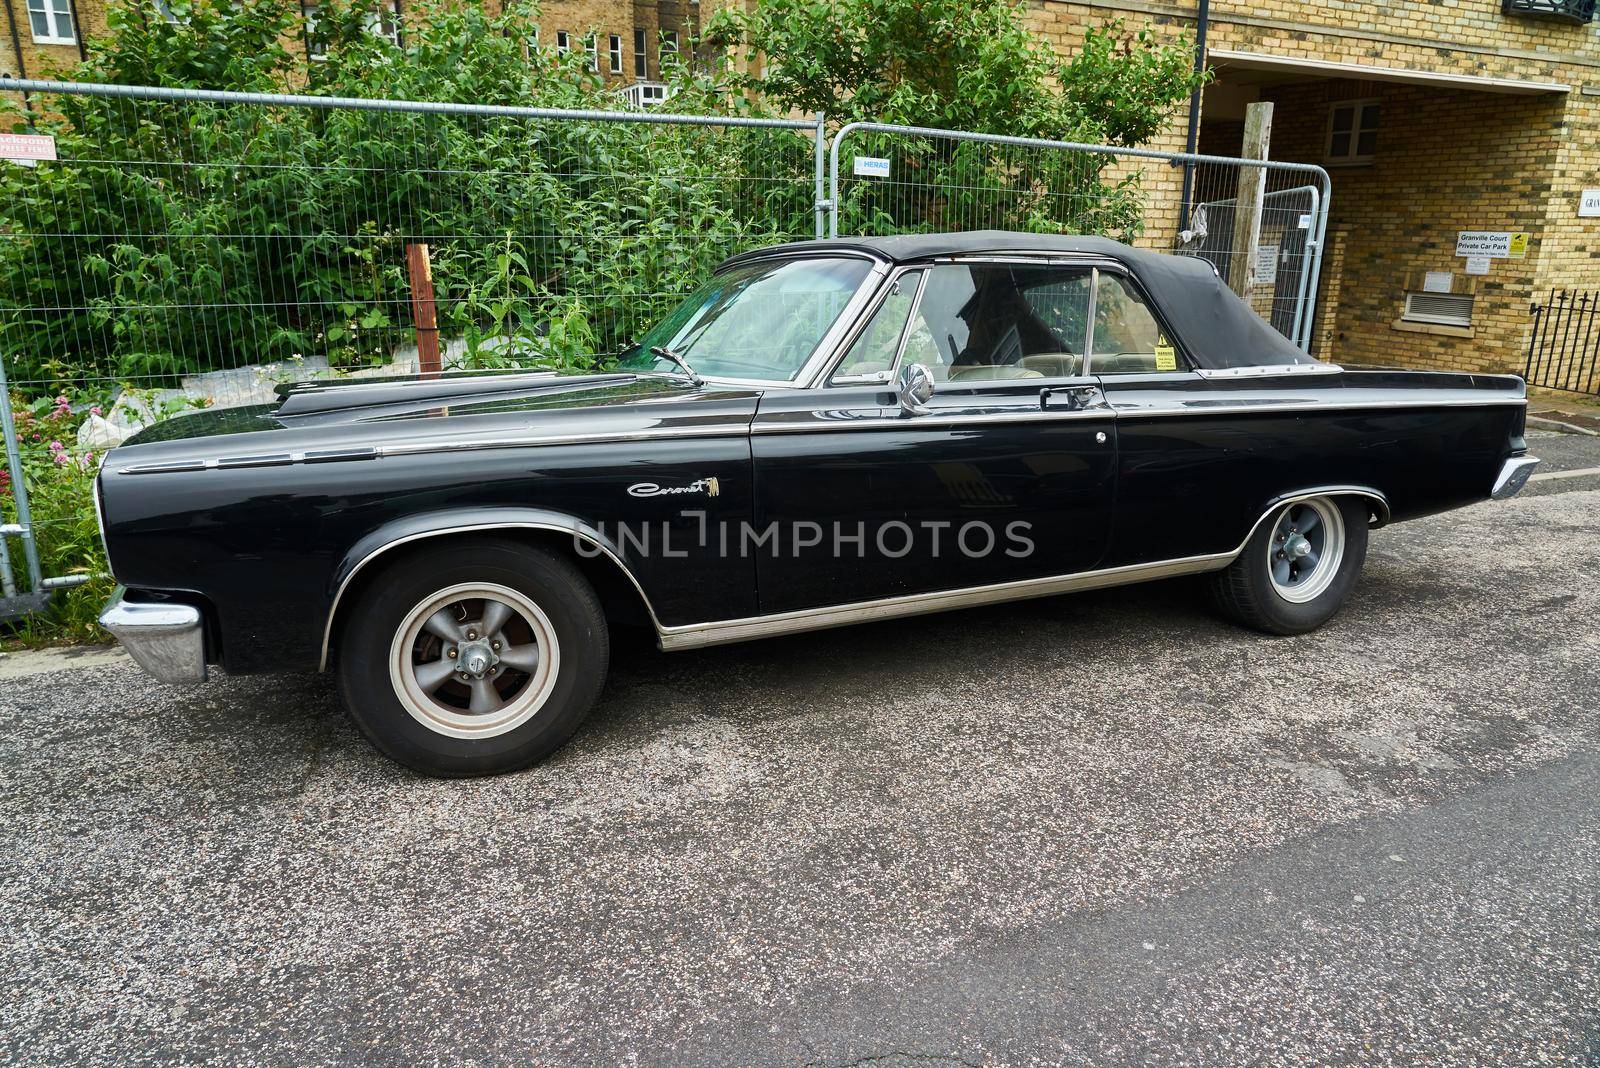 Ramsgate, United Kingdom - June 29, 2021: A 1965 Dodge Coronet 500 by ChrisWestPhoto